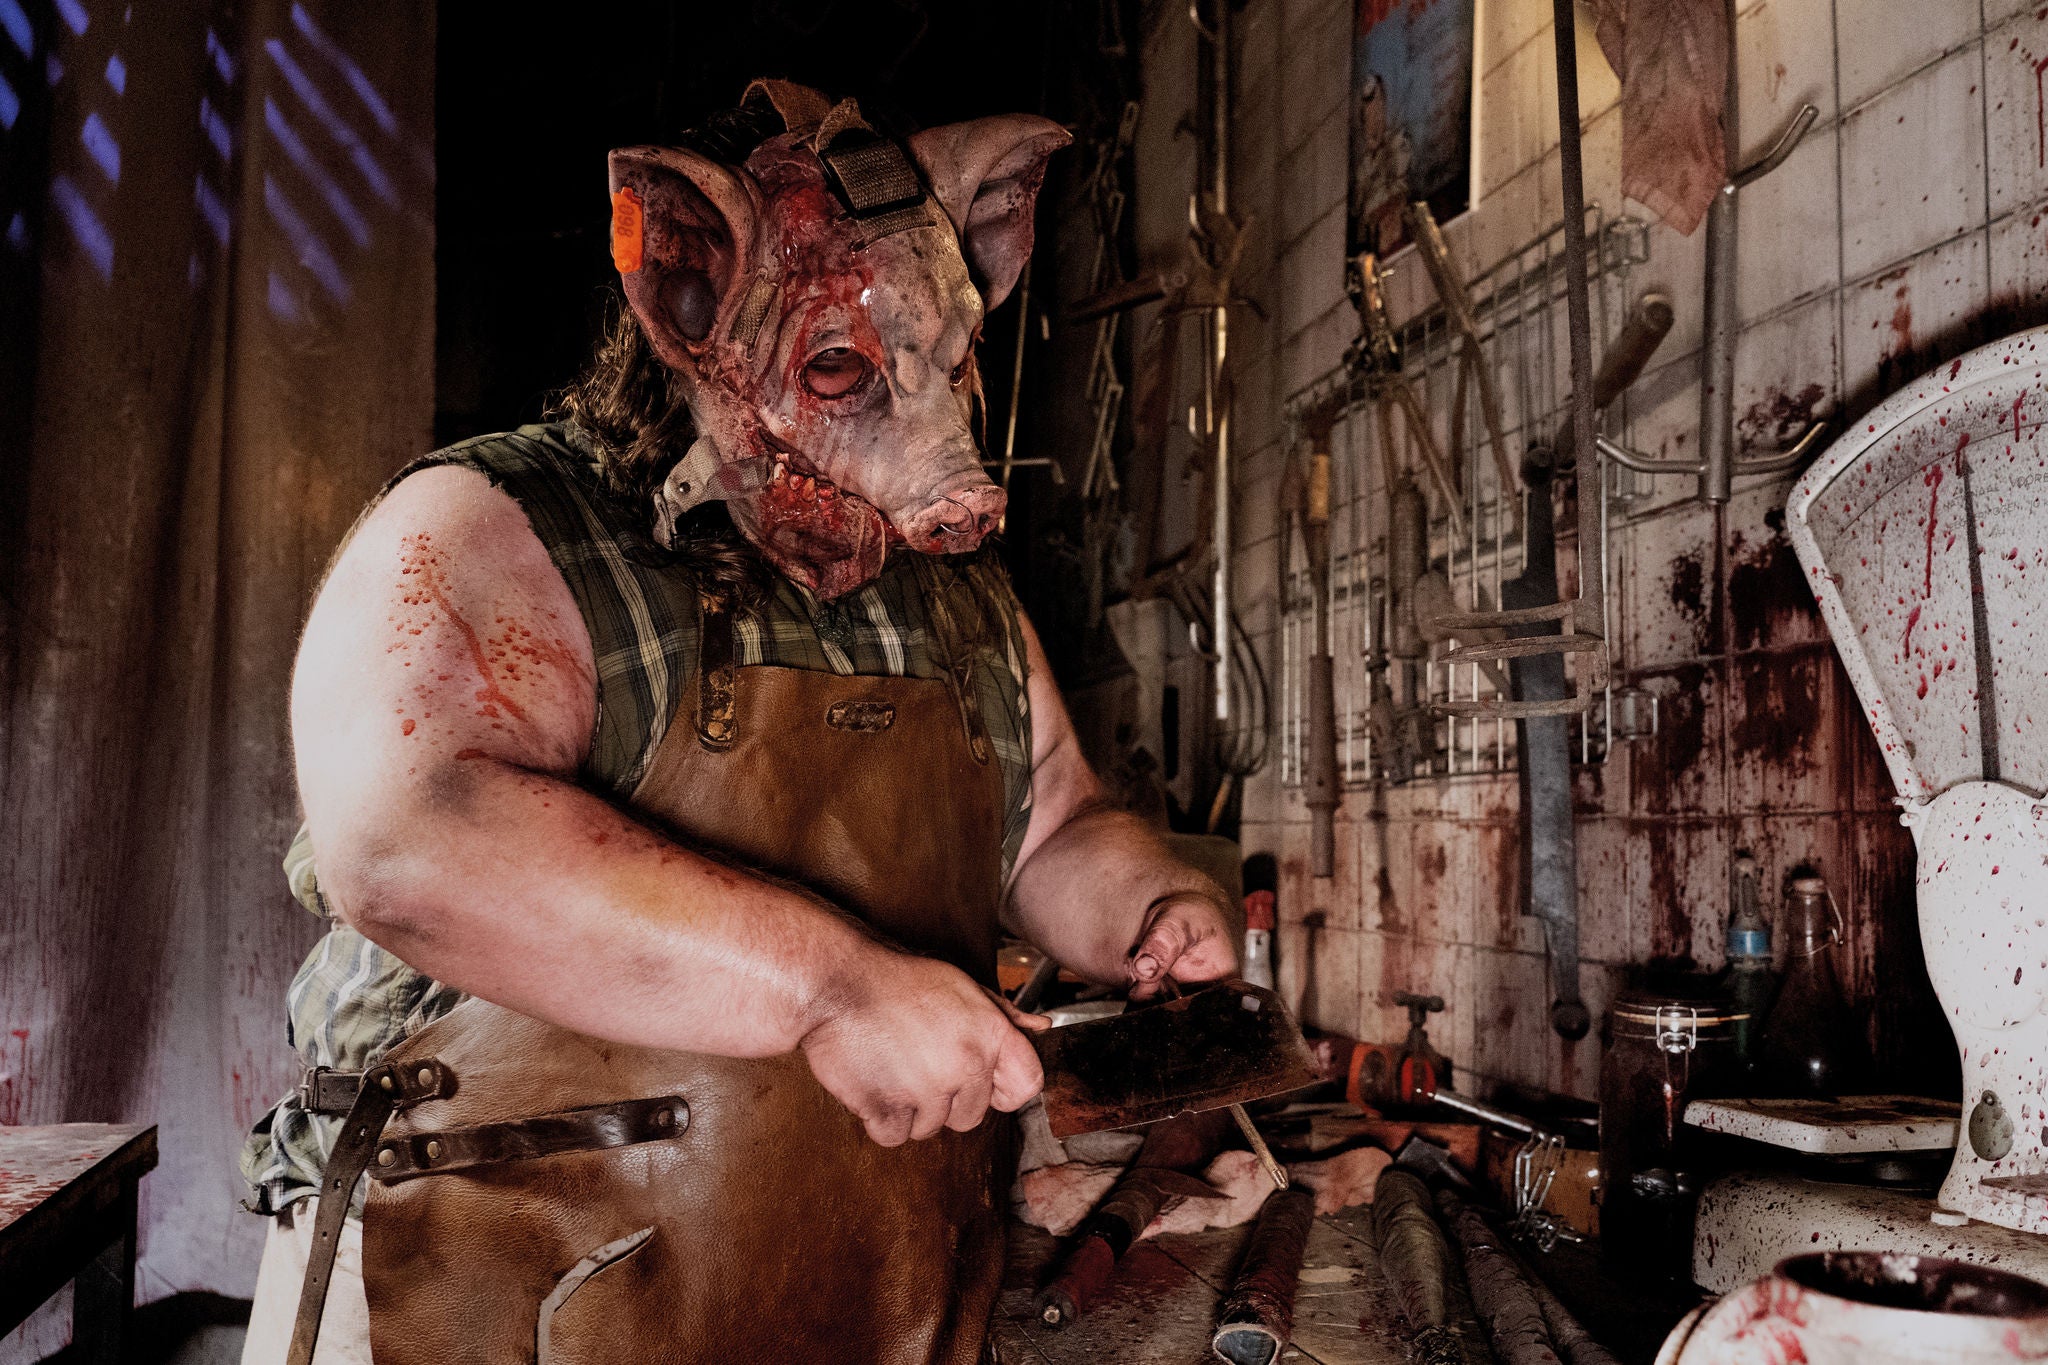 A monster with a pig head is cutting meat with bloody butcher's knives 